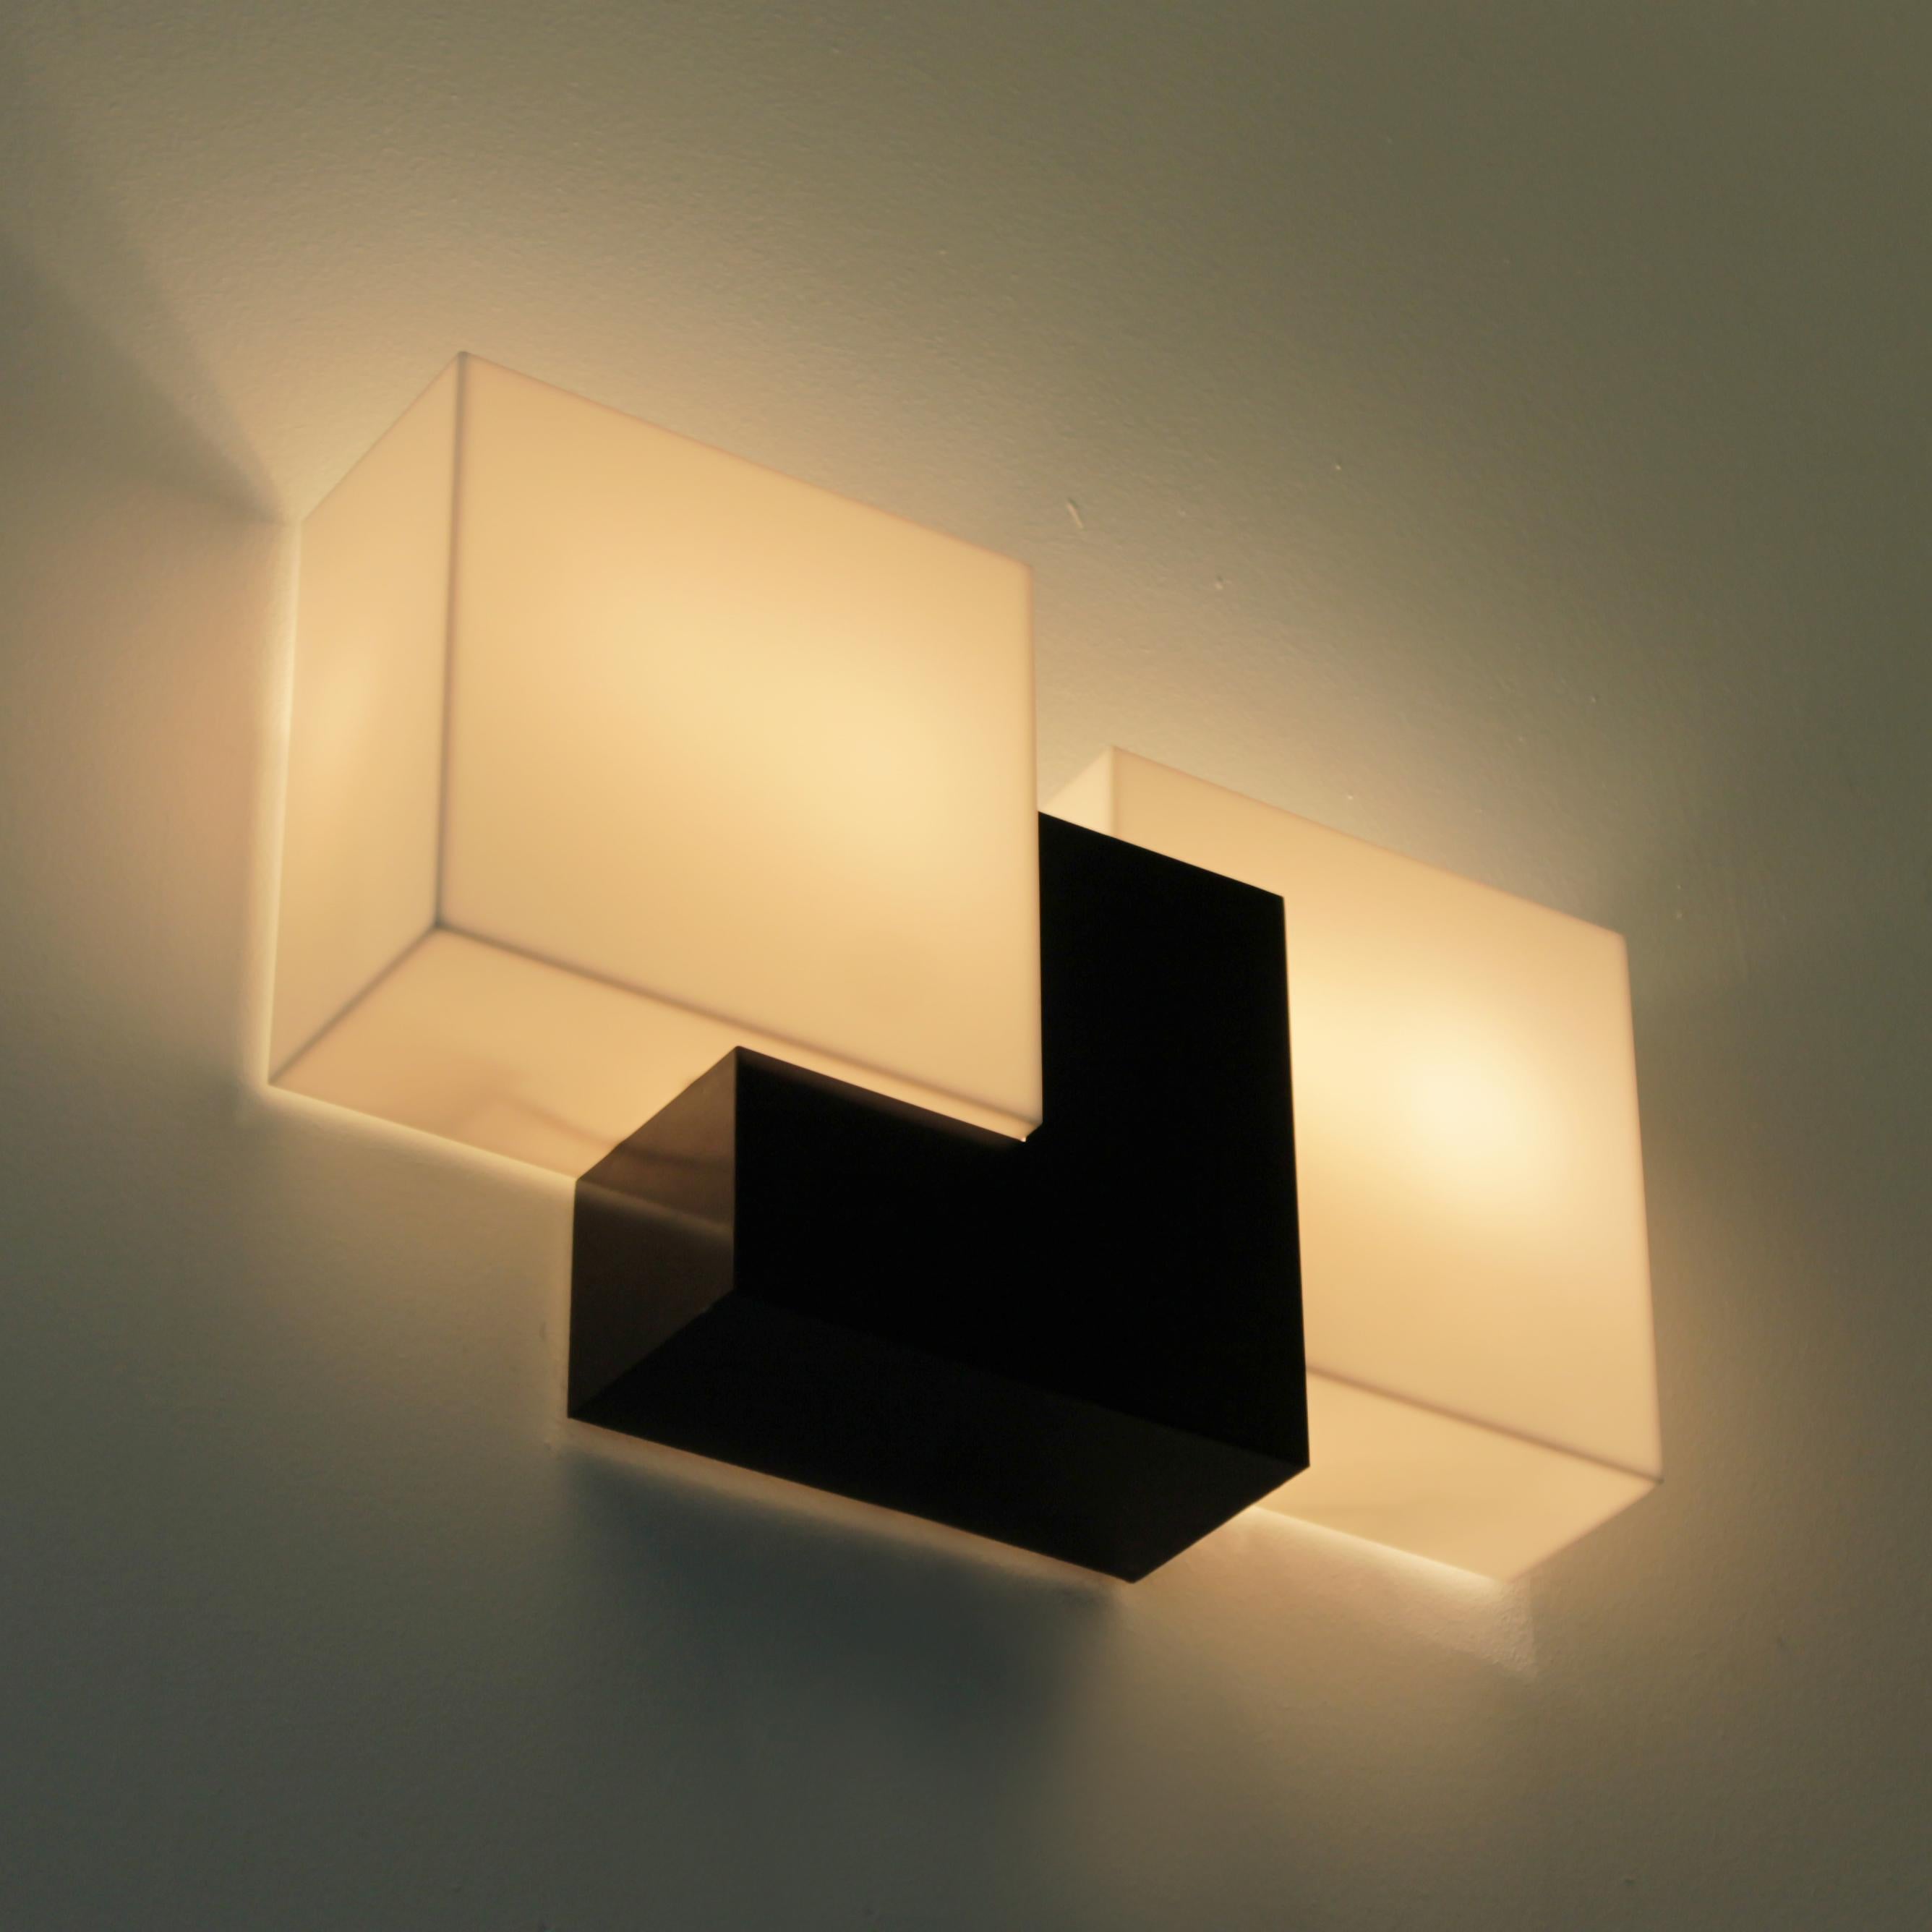 Lacquered French Modernist Wall Light from the Fifties